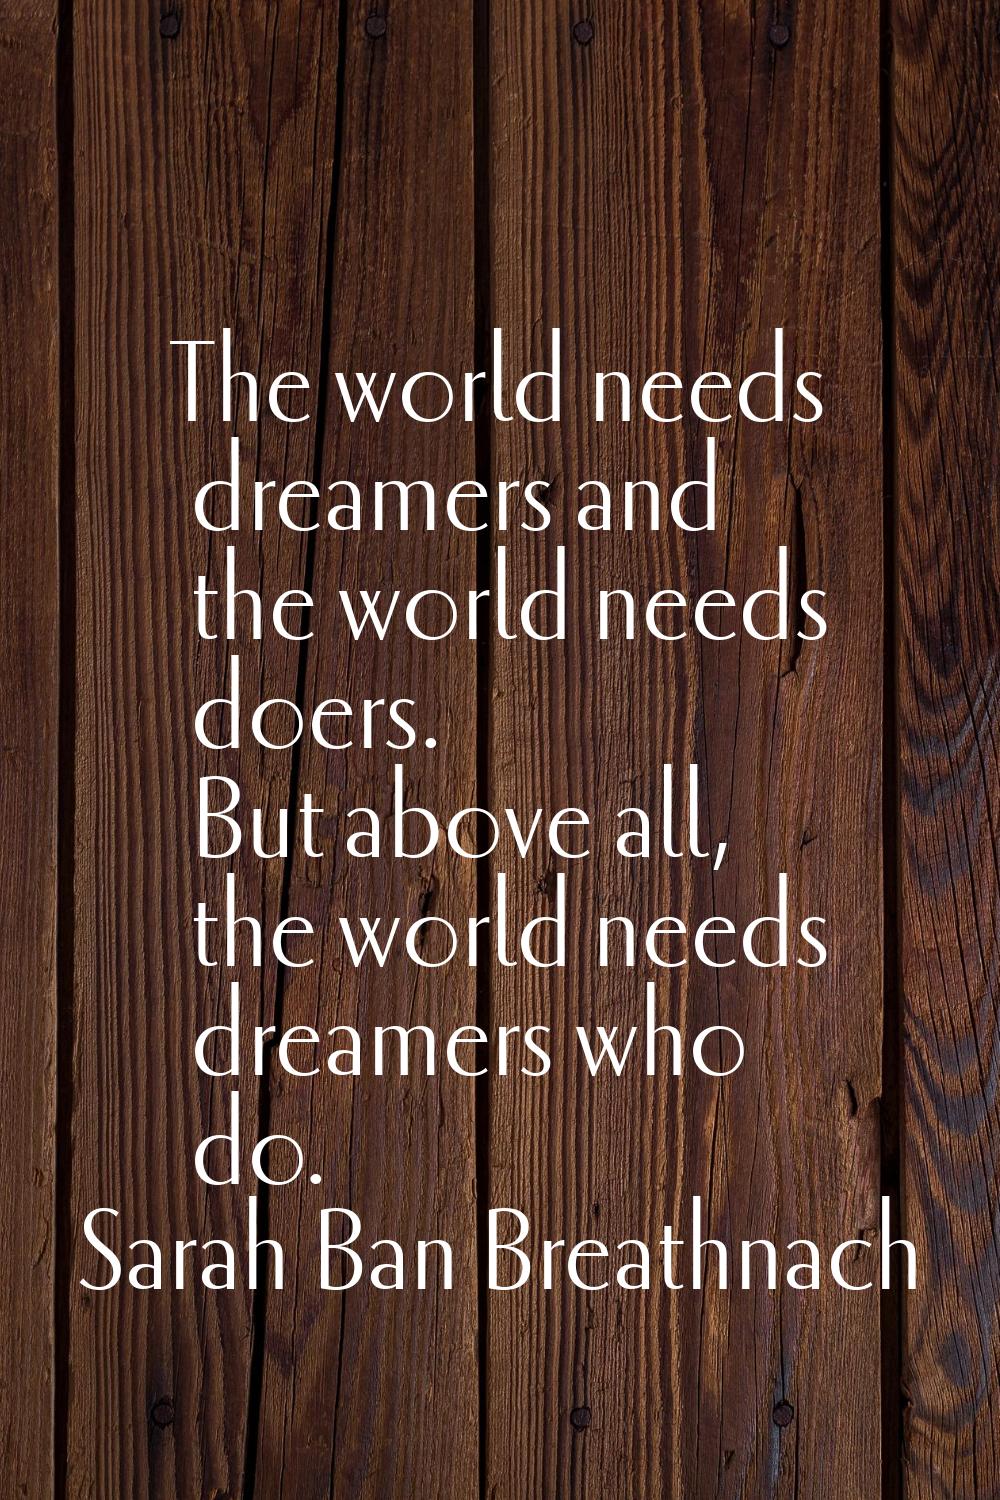 The world needs dreamers and the world needs doers. But above all, the world needs dreamers who do.